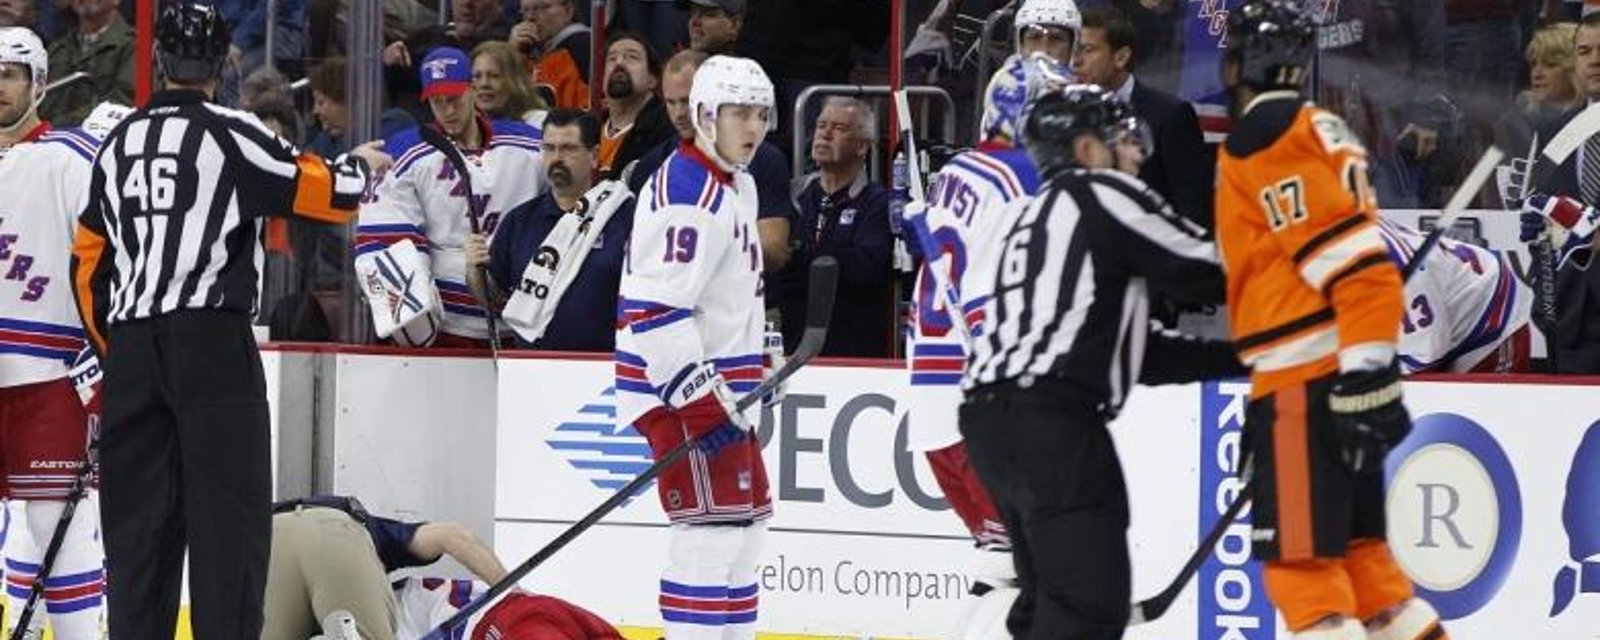 Rangers don't even attempt to hide their threat to Wayne Simmonds.